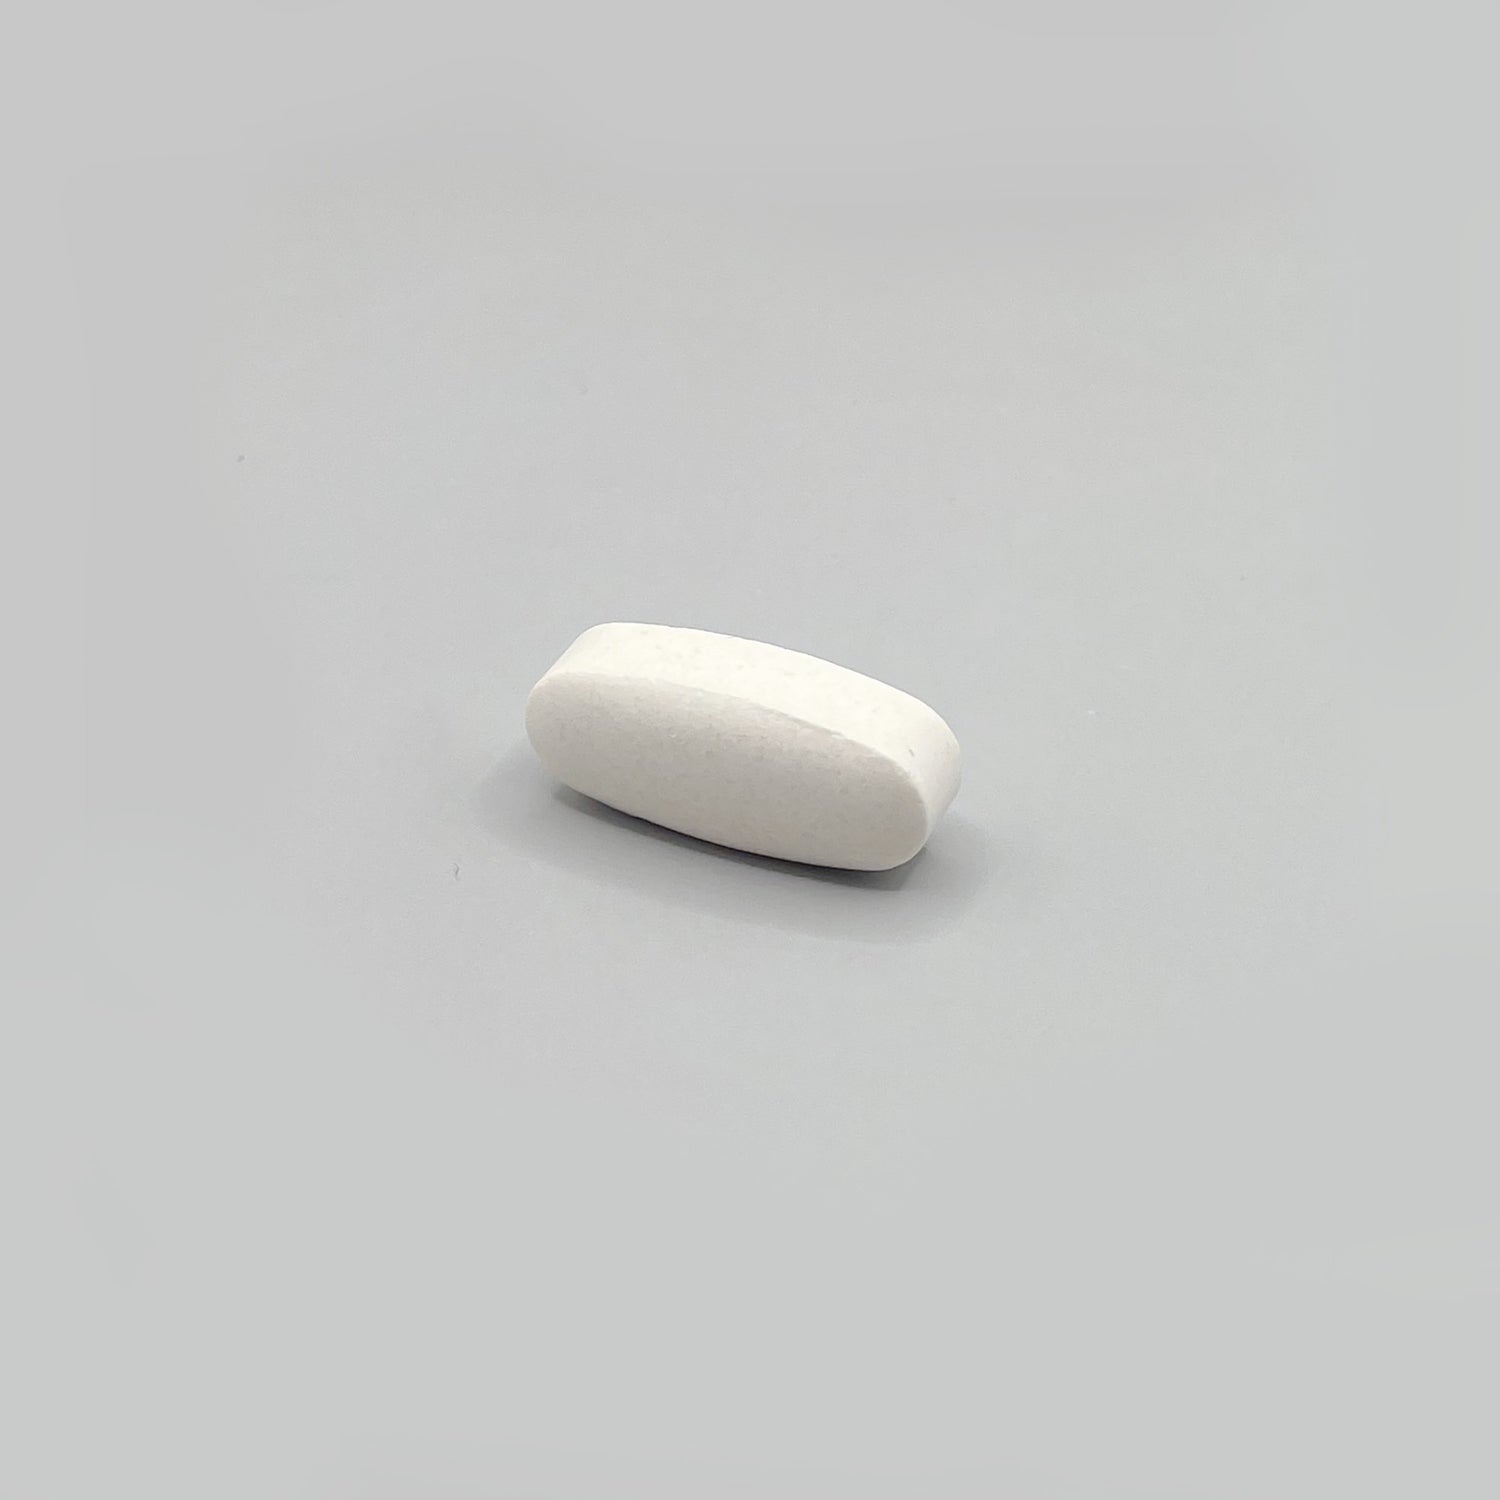 Oval shaped white pill